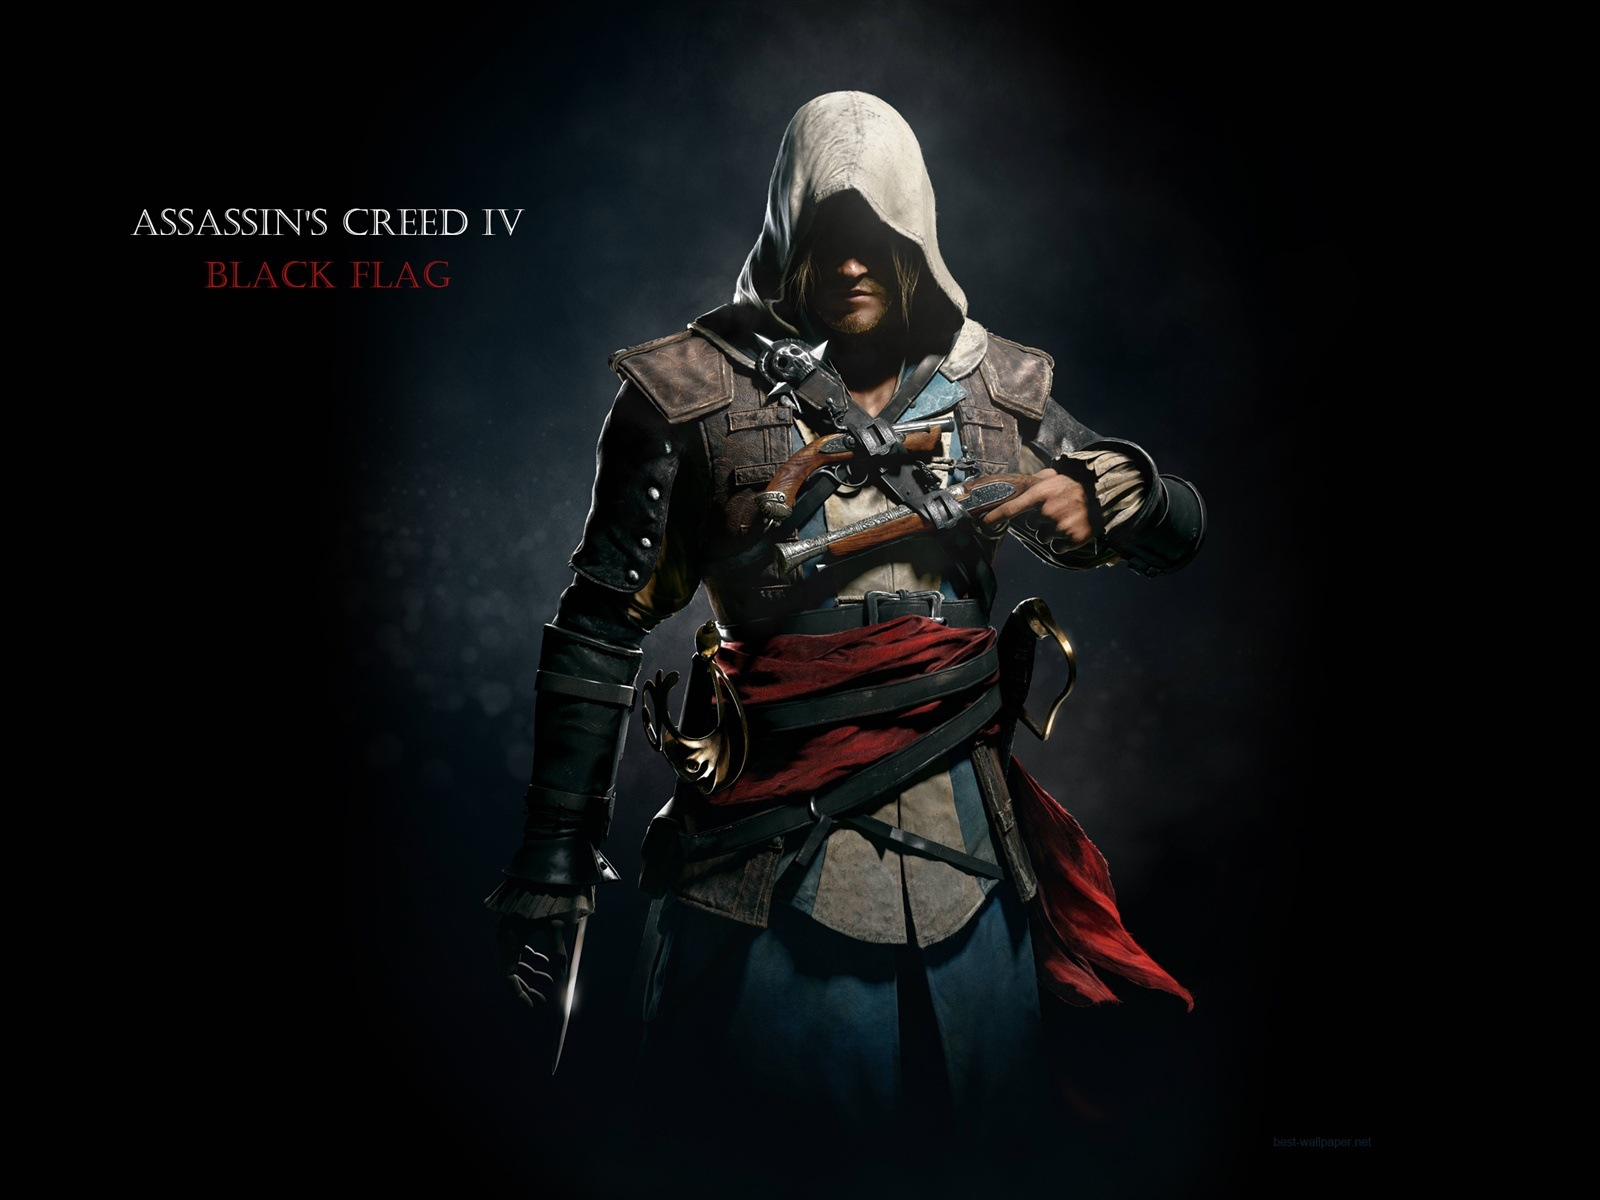 Assassin's Creed IV: Black Flag HD wallpapers #9 - 1600x1200